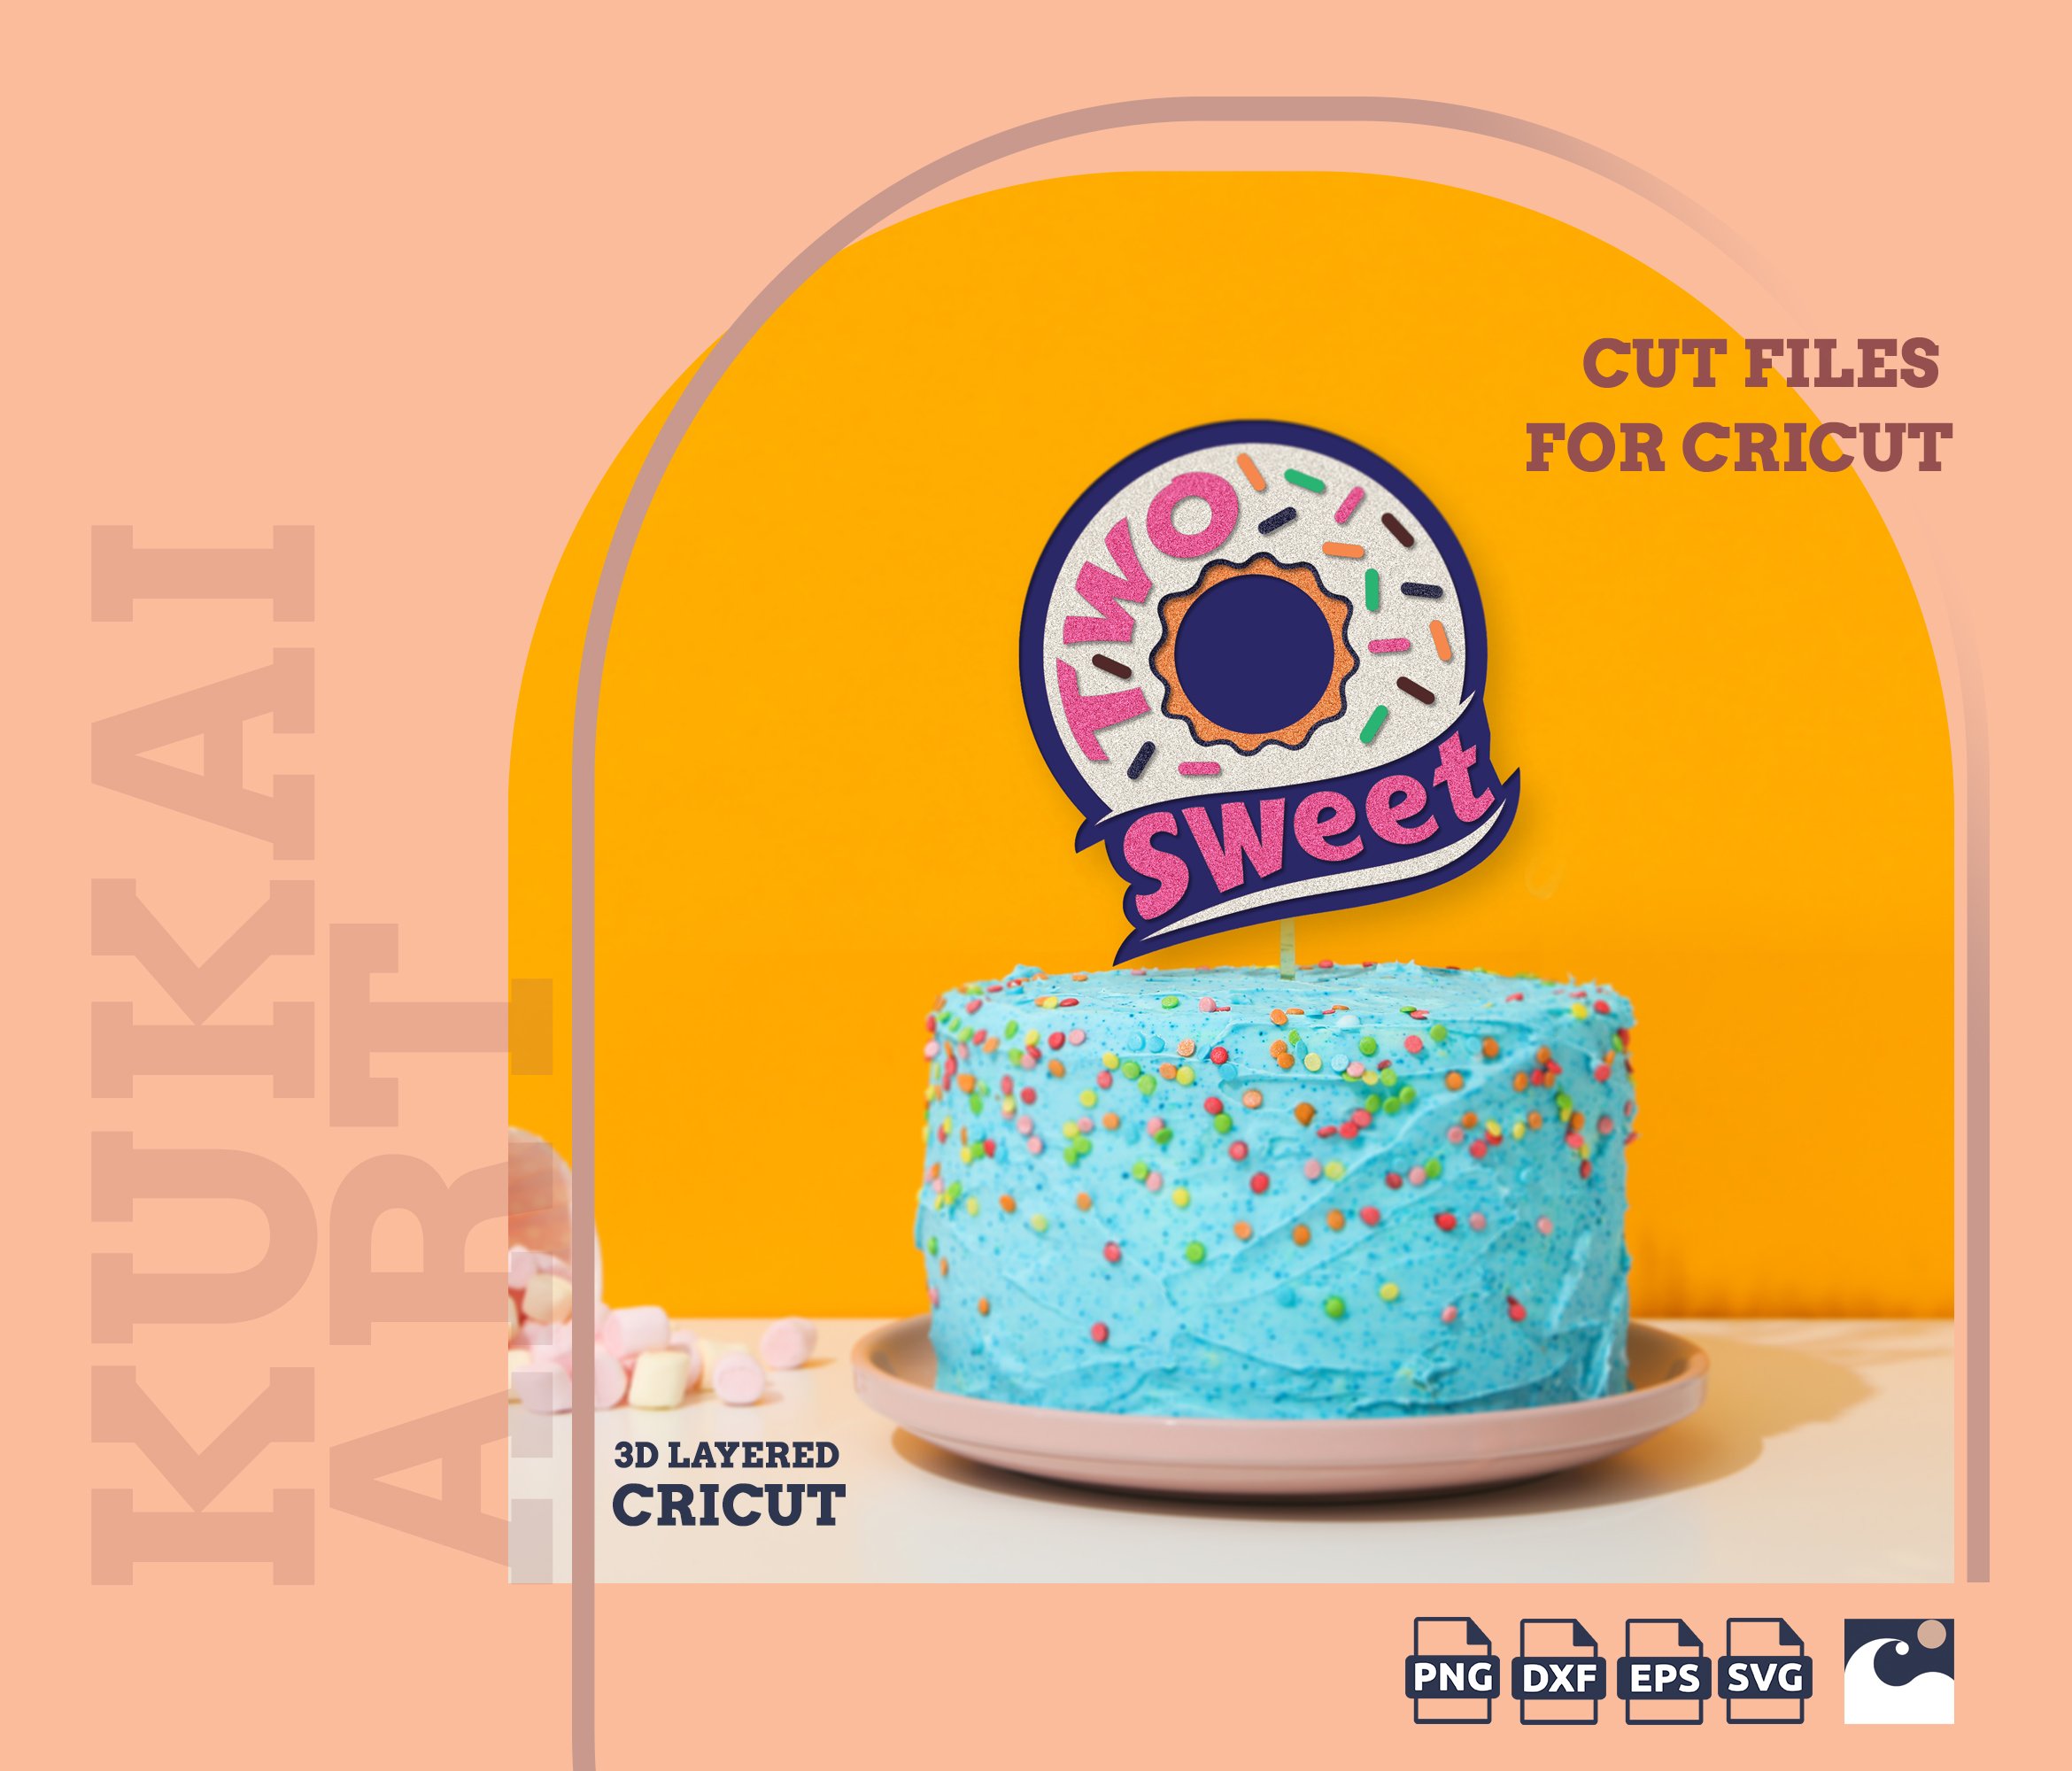 Two-Sweet-Donut-Birthday-3D-Layered-Paper-Cut-File-04.jpg